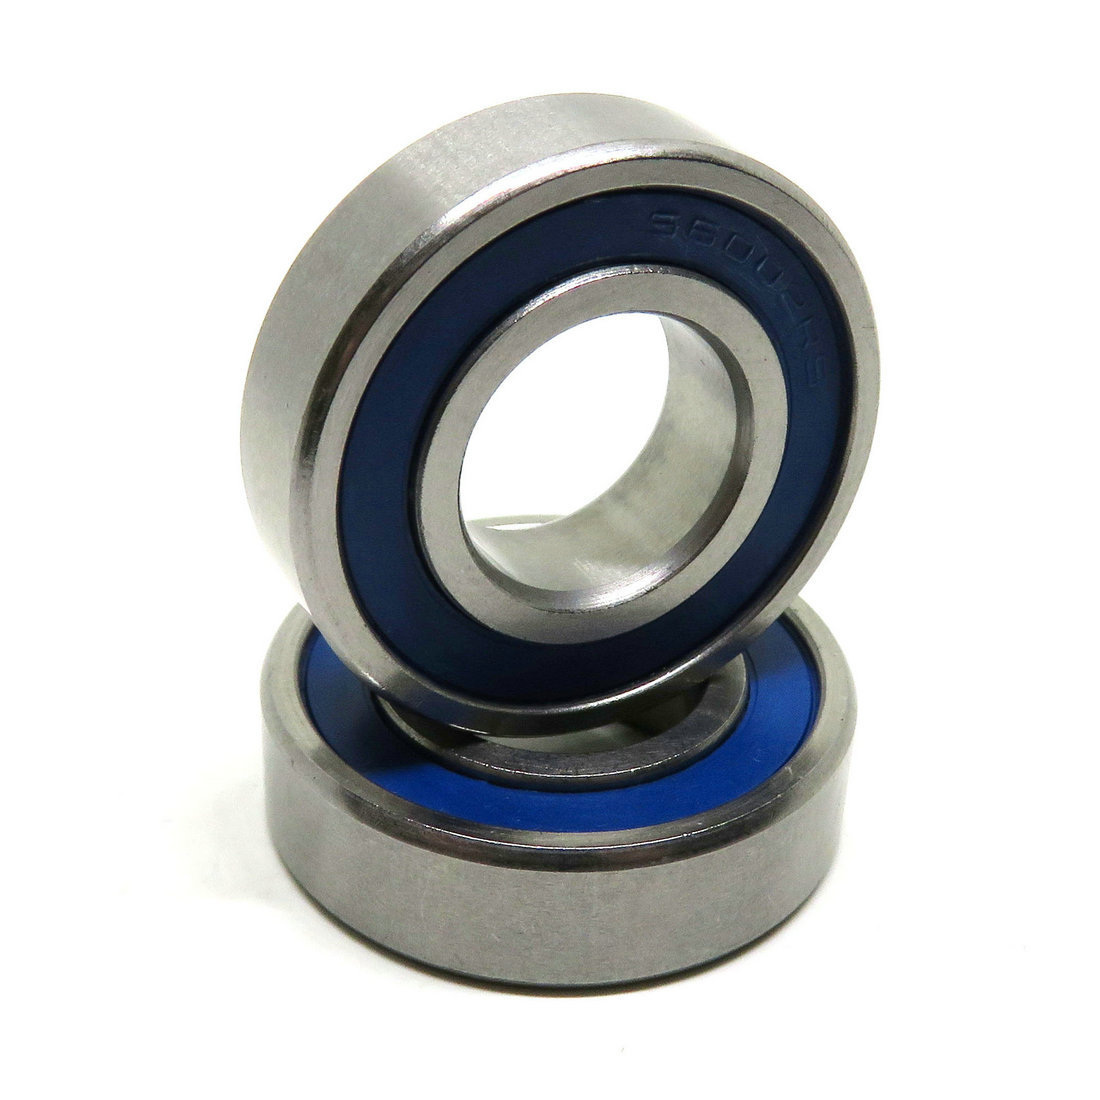 SS6005-2RS Stainless Steel Ball Bearing 25x47x12 S6005-2RS AISI 440C Radial Bearing Resistant to Corrosion and High Temperatures